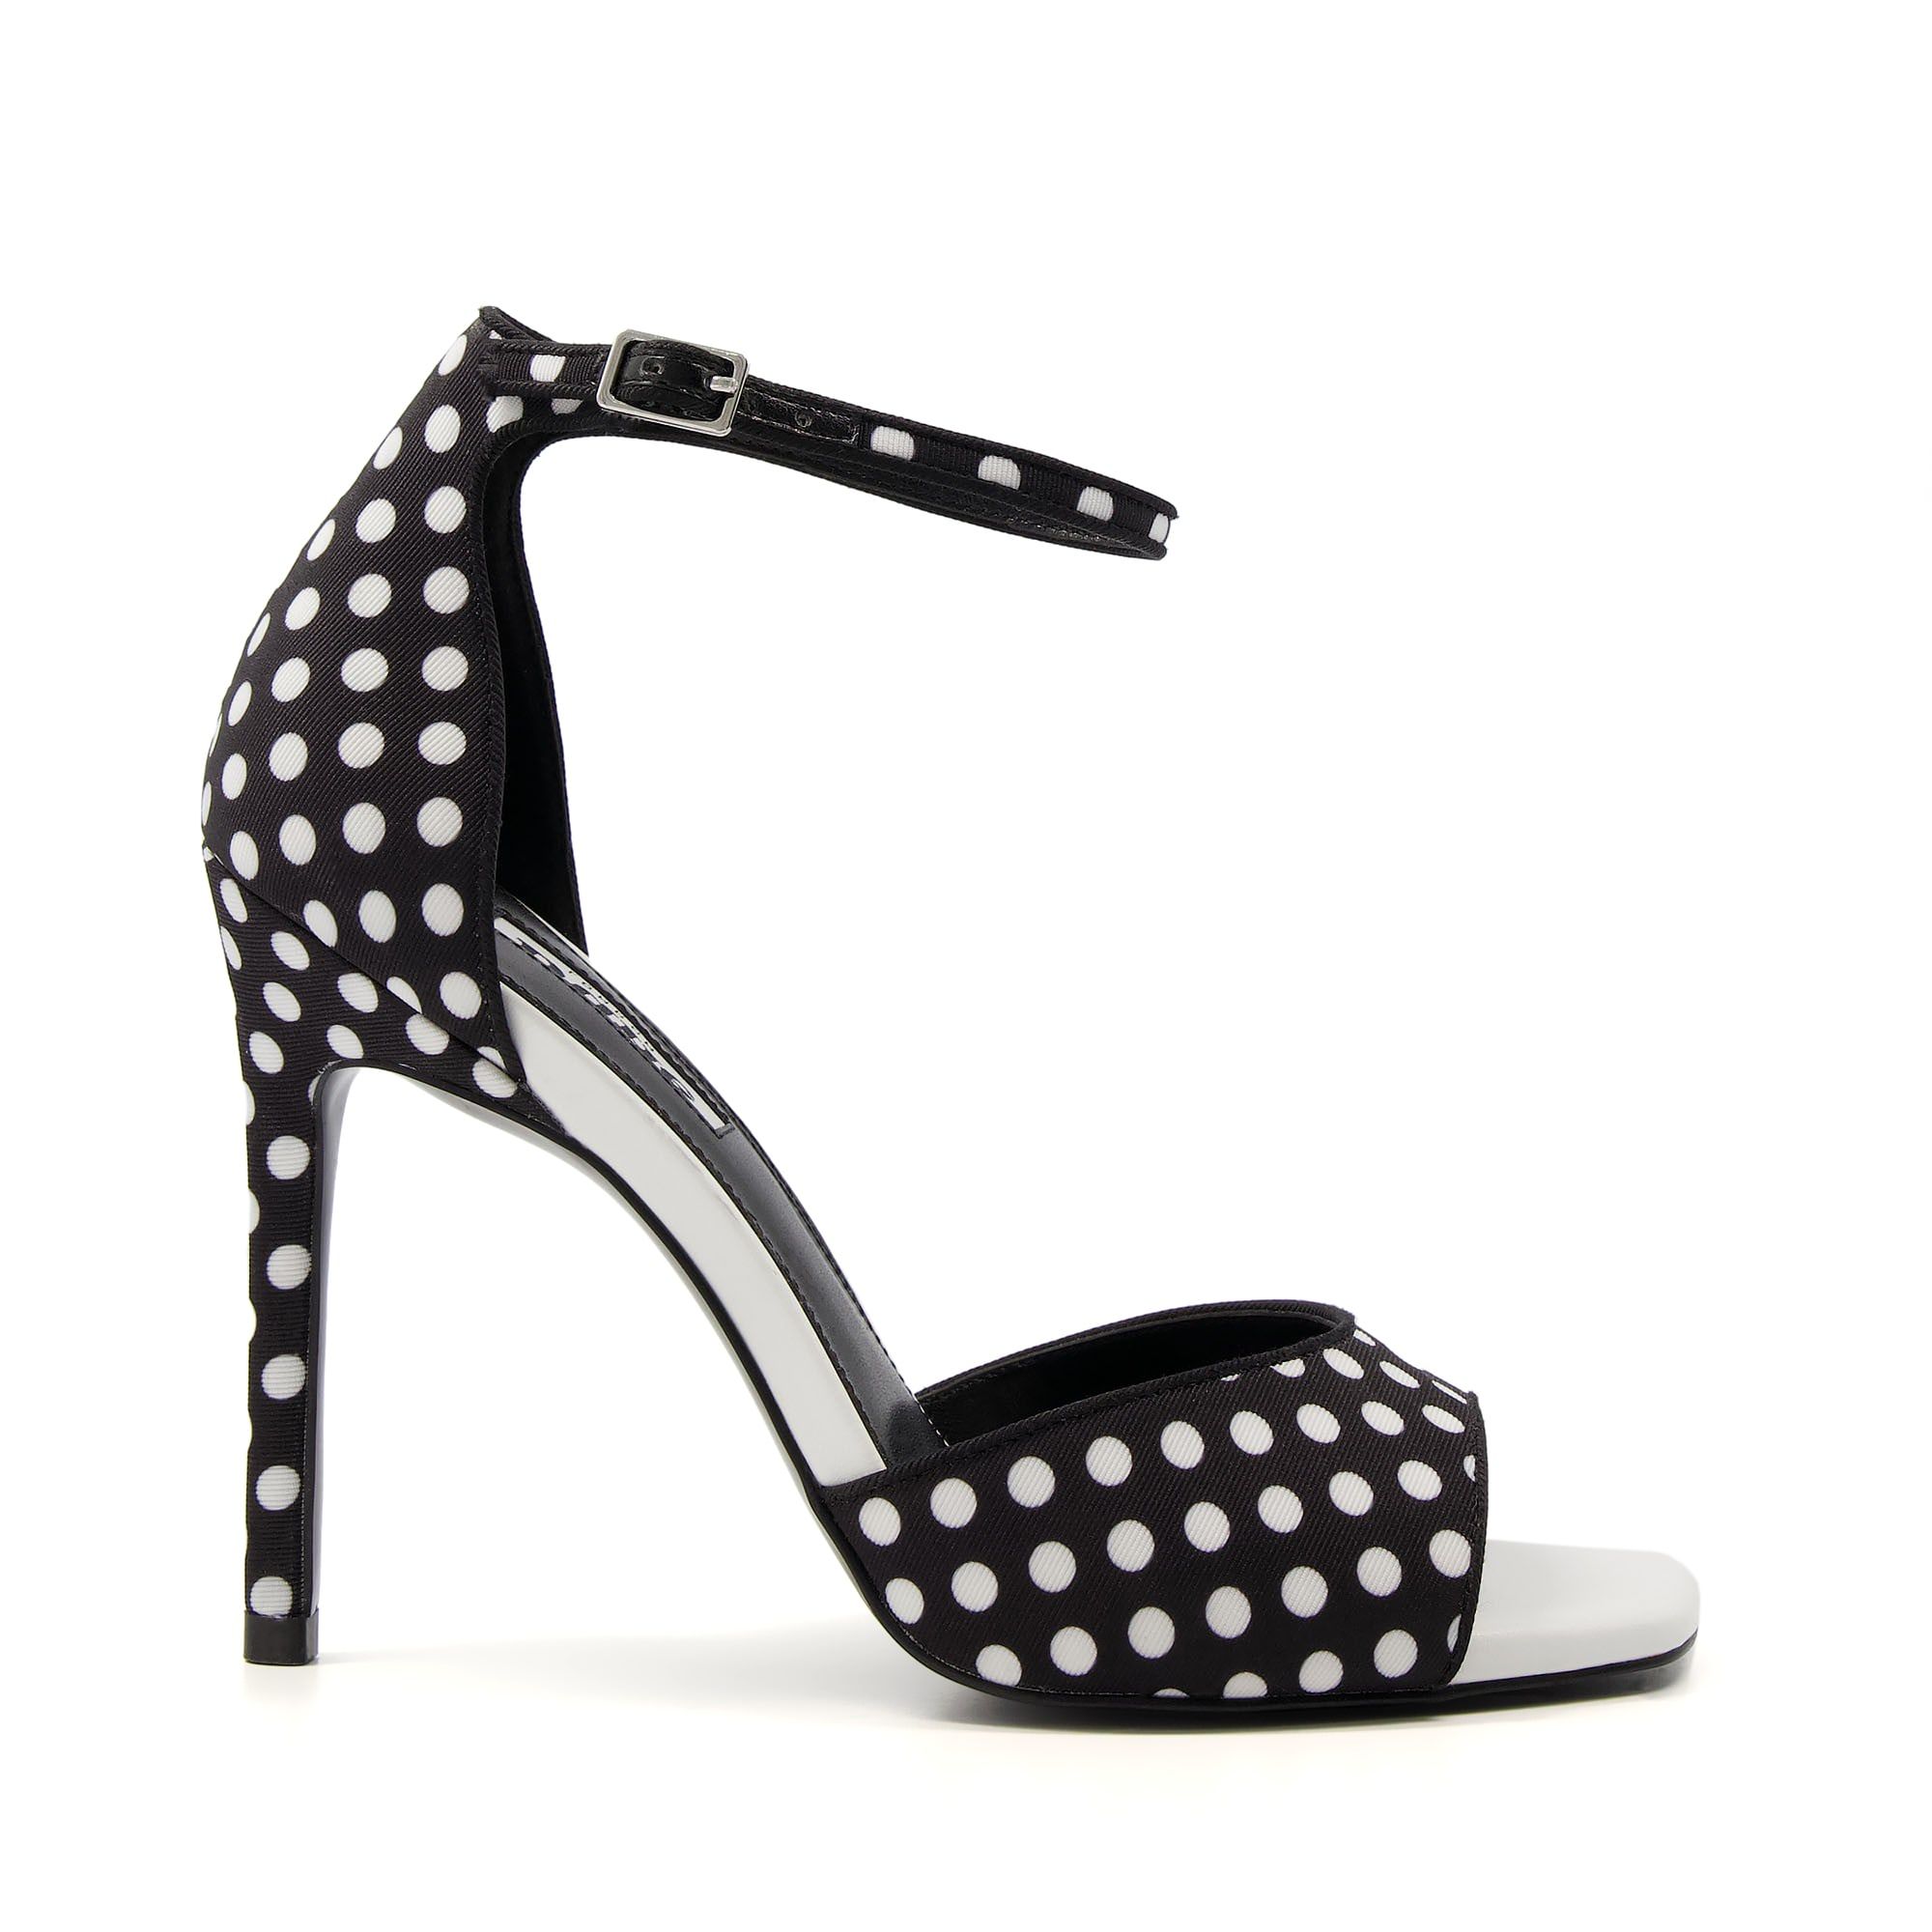 The perfect style for summer events, our Mango heels feature a classic monochrome polka-dot. Team this peep-toe pair with vibrant colours for a feminine uplift.